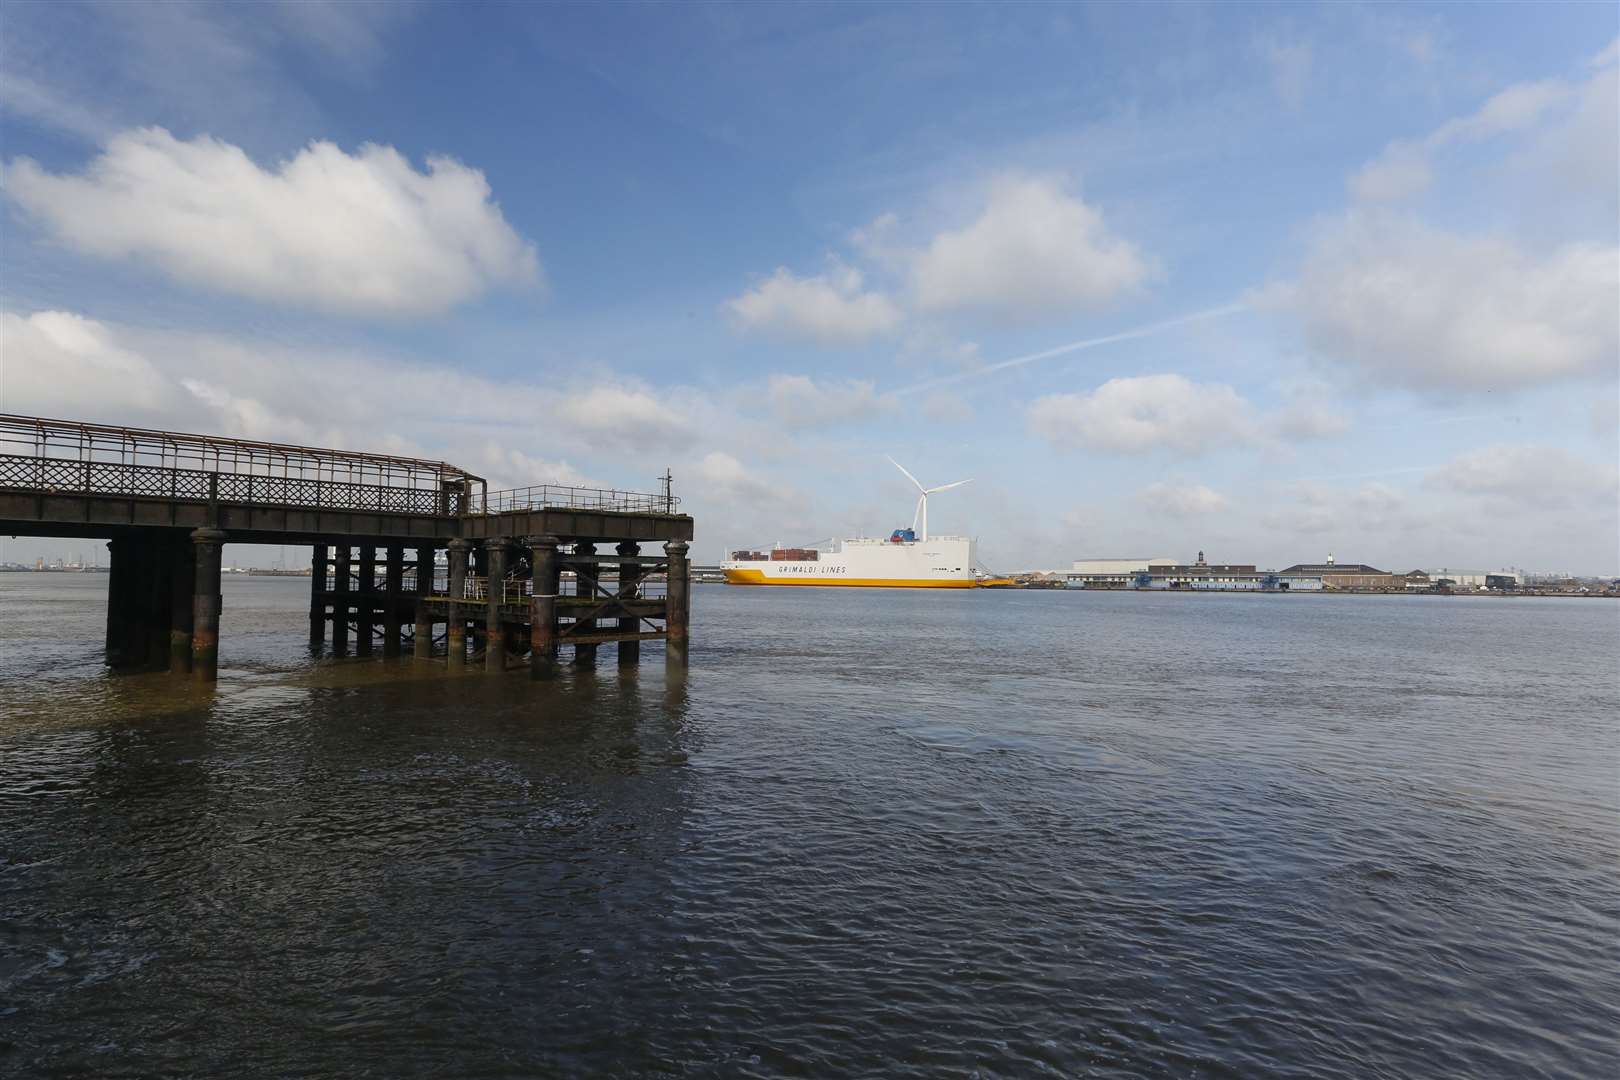 Rumours abounded that Henry’s body had been thrown into the Thames, near Gravesend